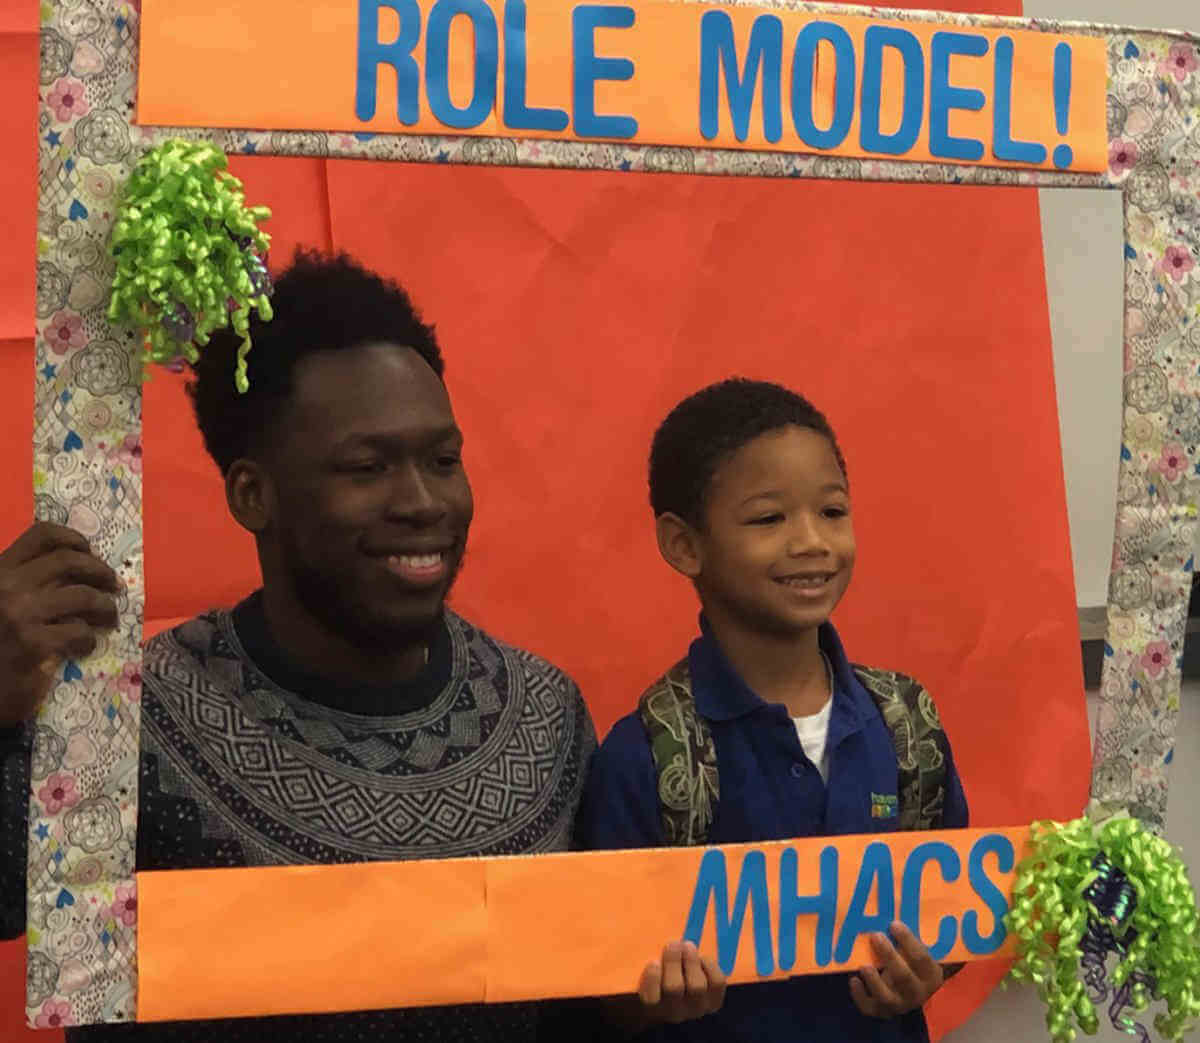 MHACS students bring male role models to school